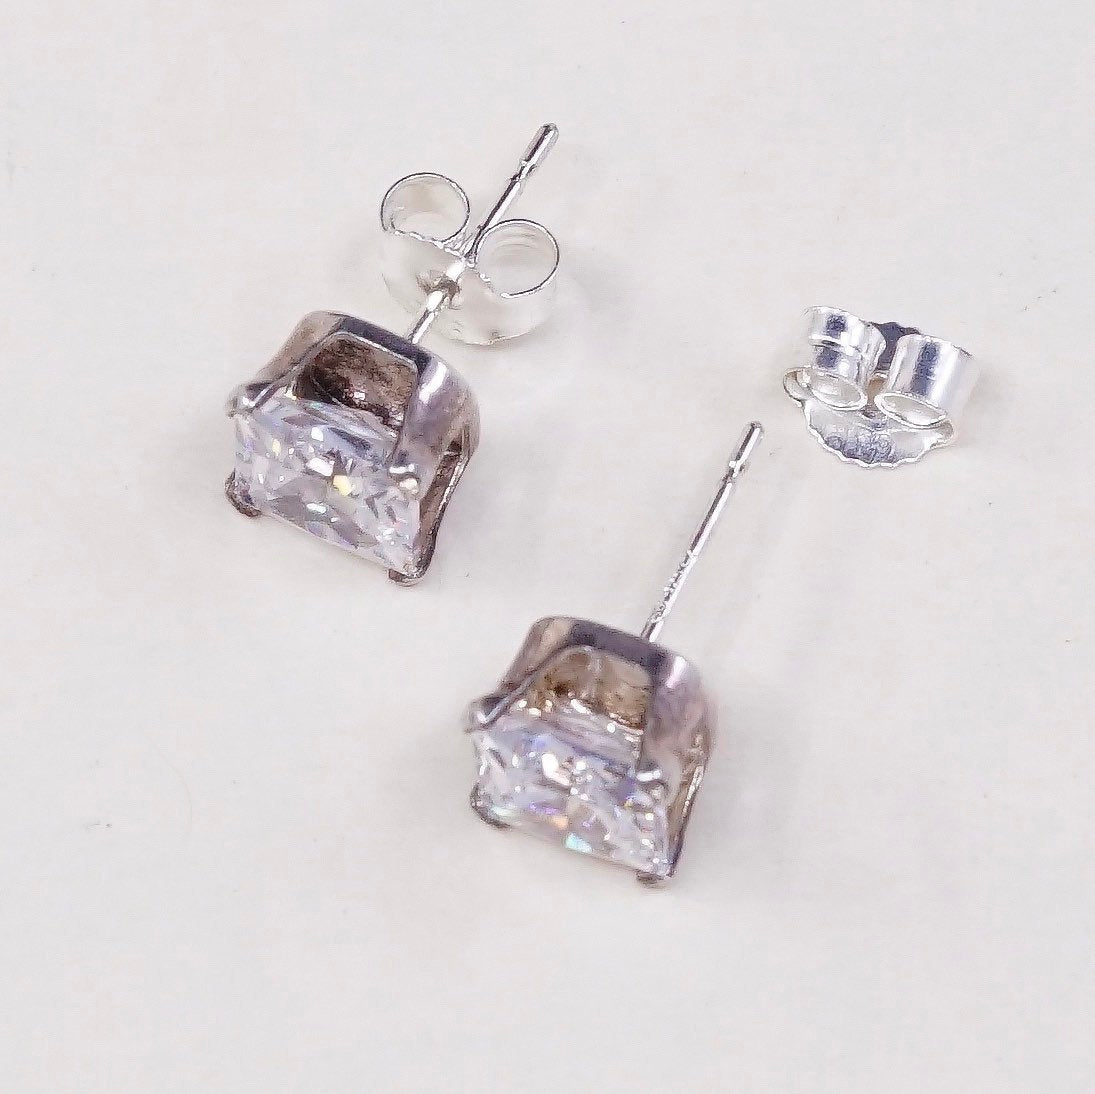 vtg sterling silver square clear CZ studs, fashion minimalist earrings